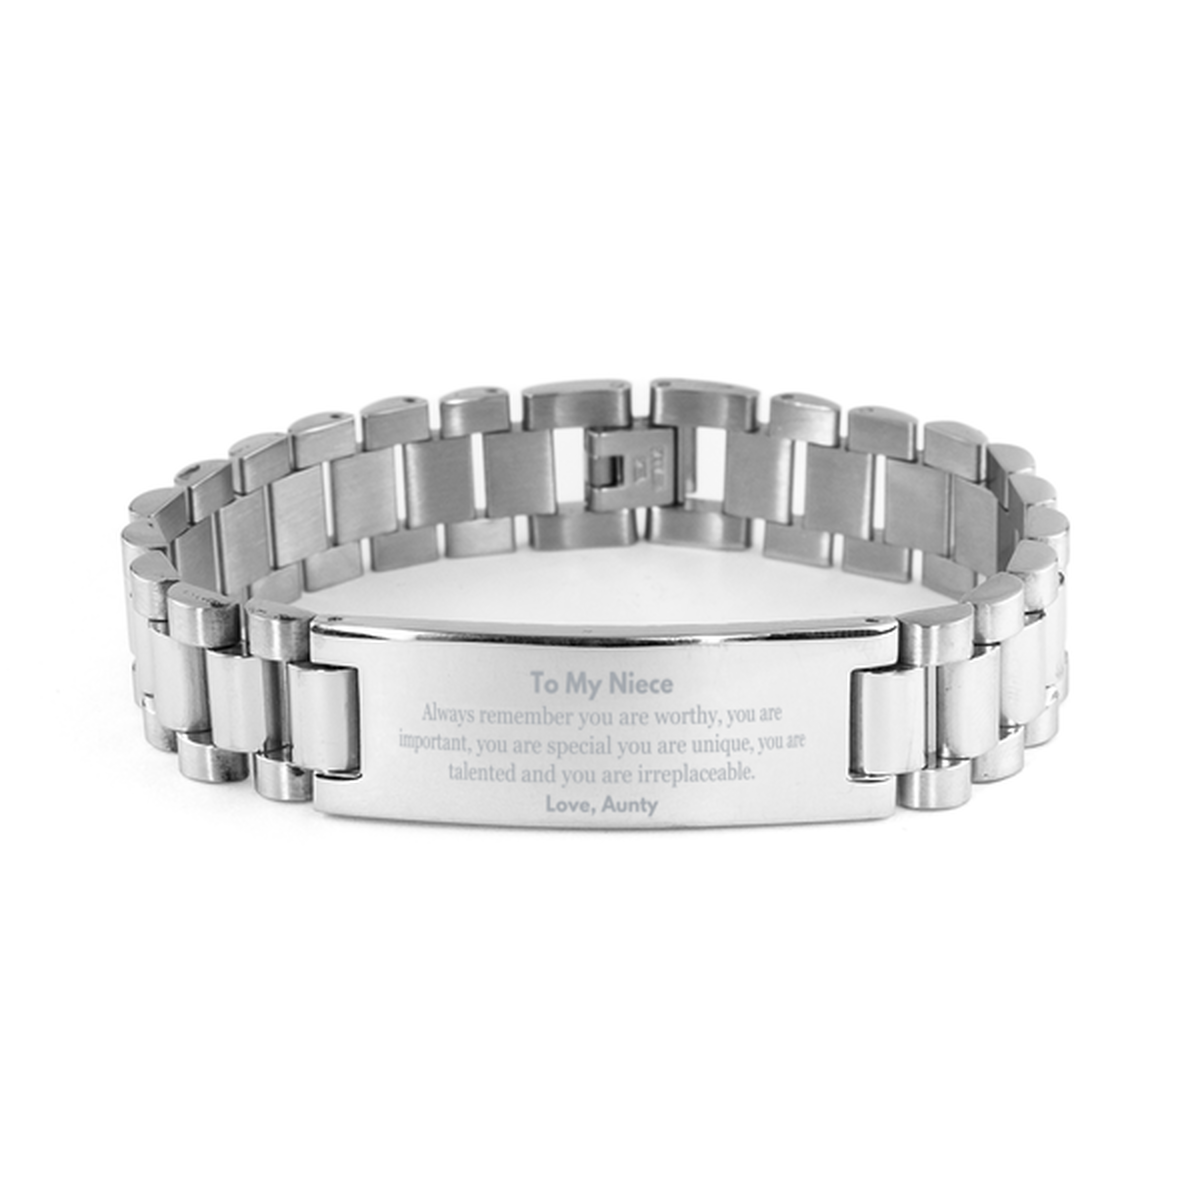 Niece Birthday Gifts from Aunty, Inspirational Ladder Stainless Steel Bracelet for Niece Christmas Graduation Gifts for Niece Always remember you are worthy, you are important. Love, Aunty